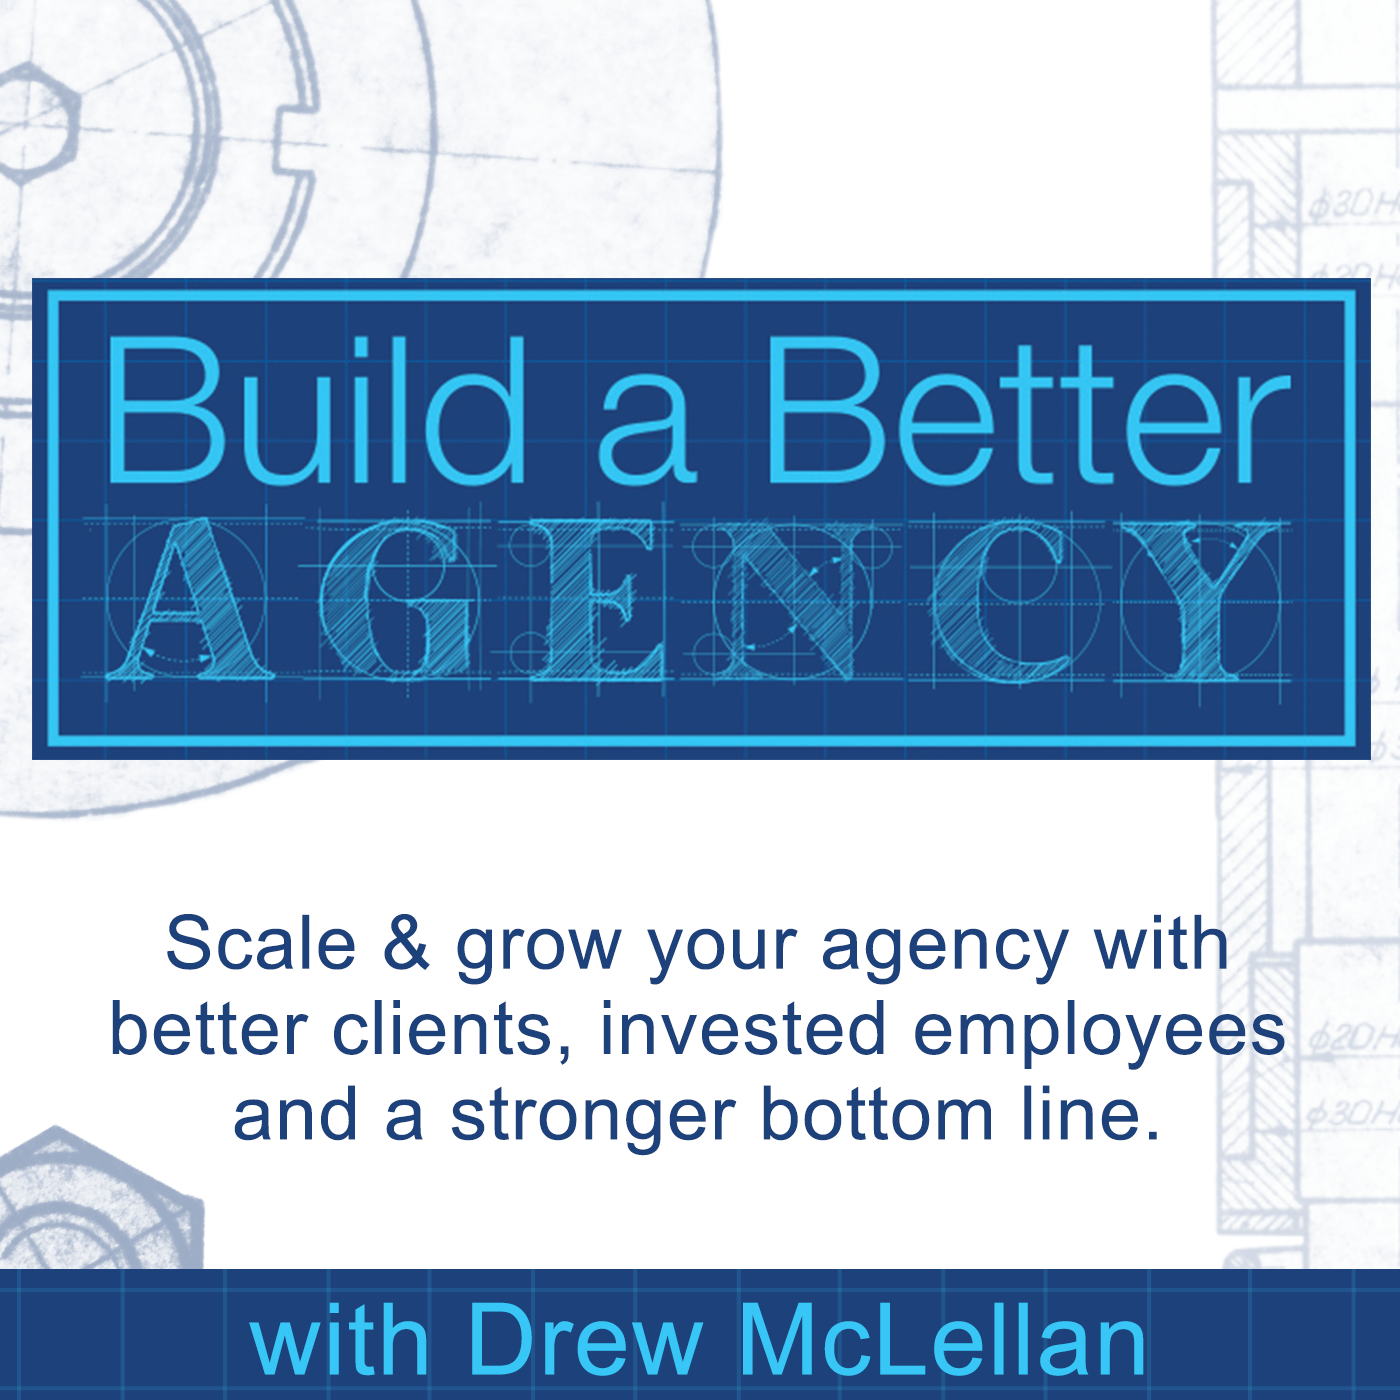 Build a Better Agency